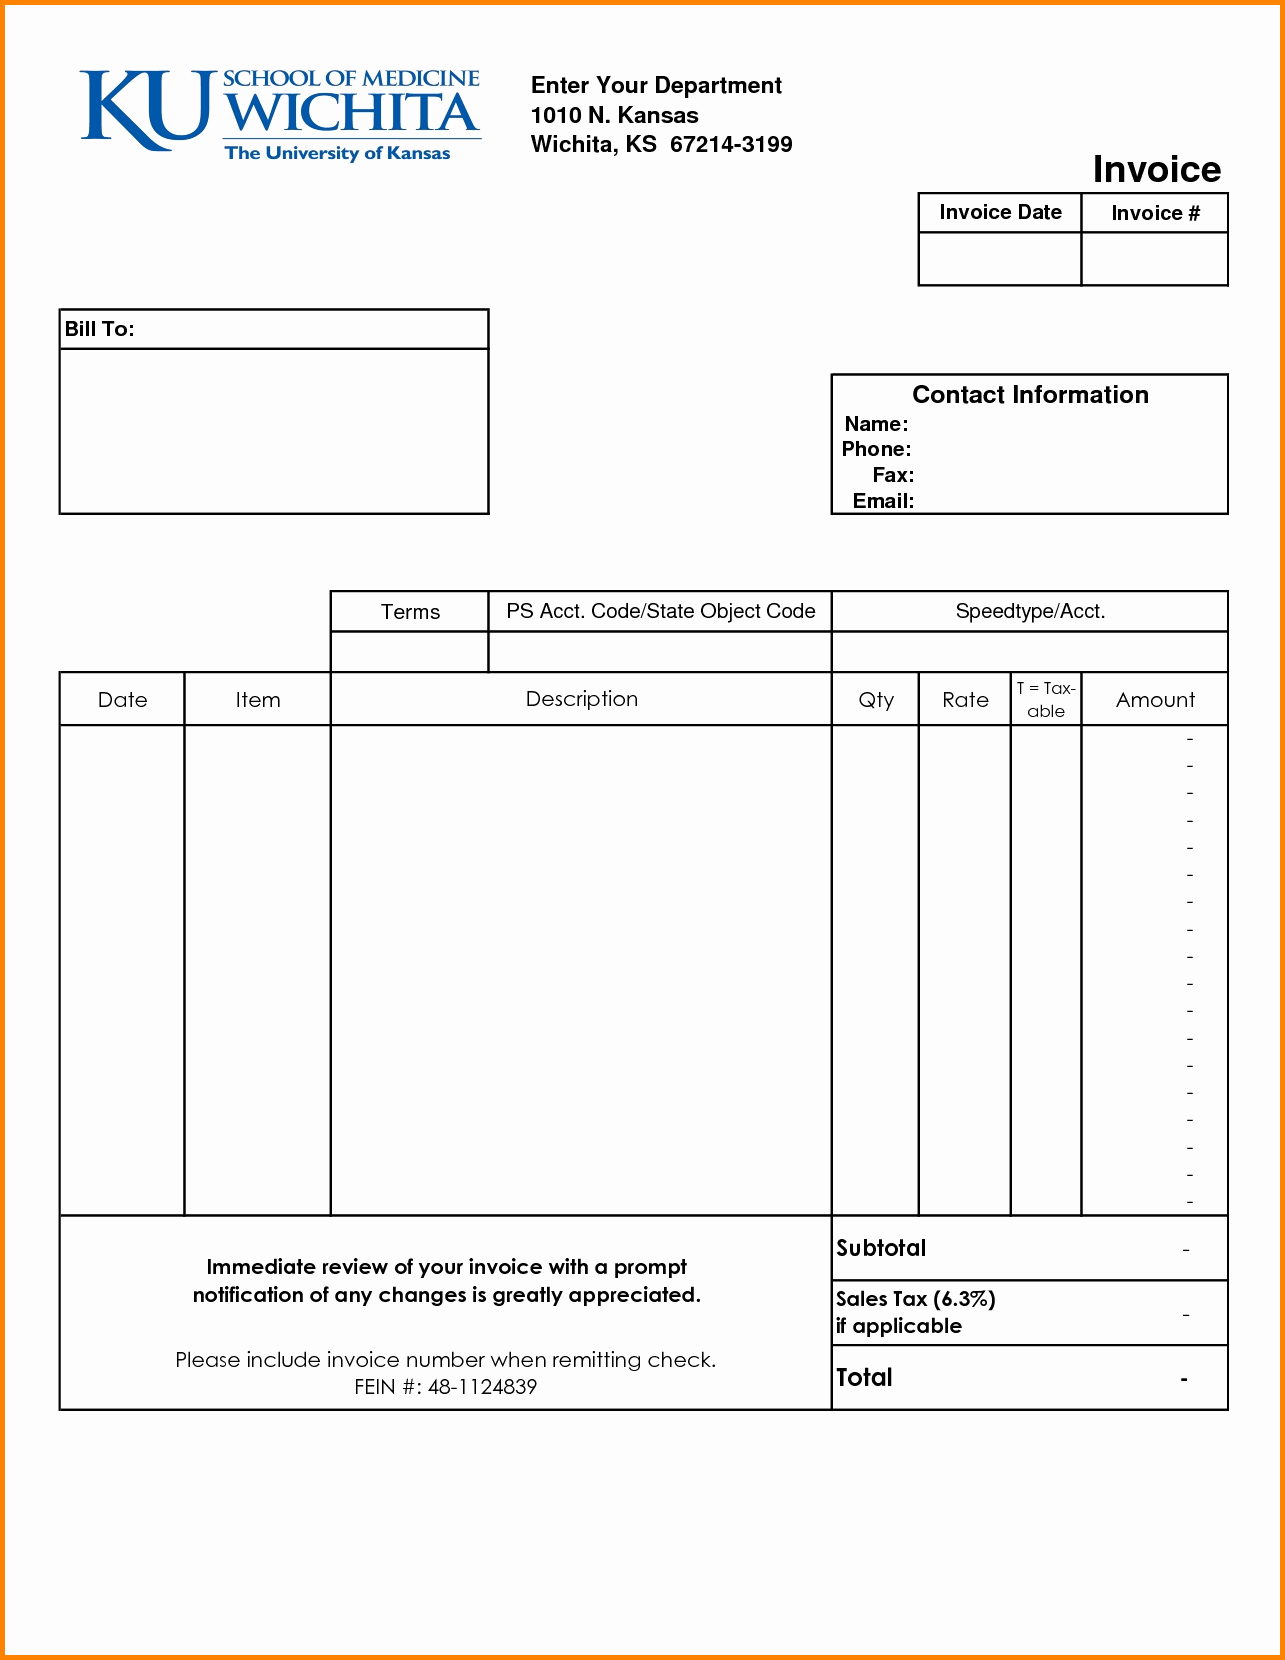 Examples Of Invoices In Word Elegant Bill Invoice format Invoice Design Inspiration